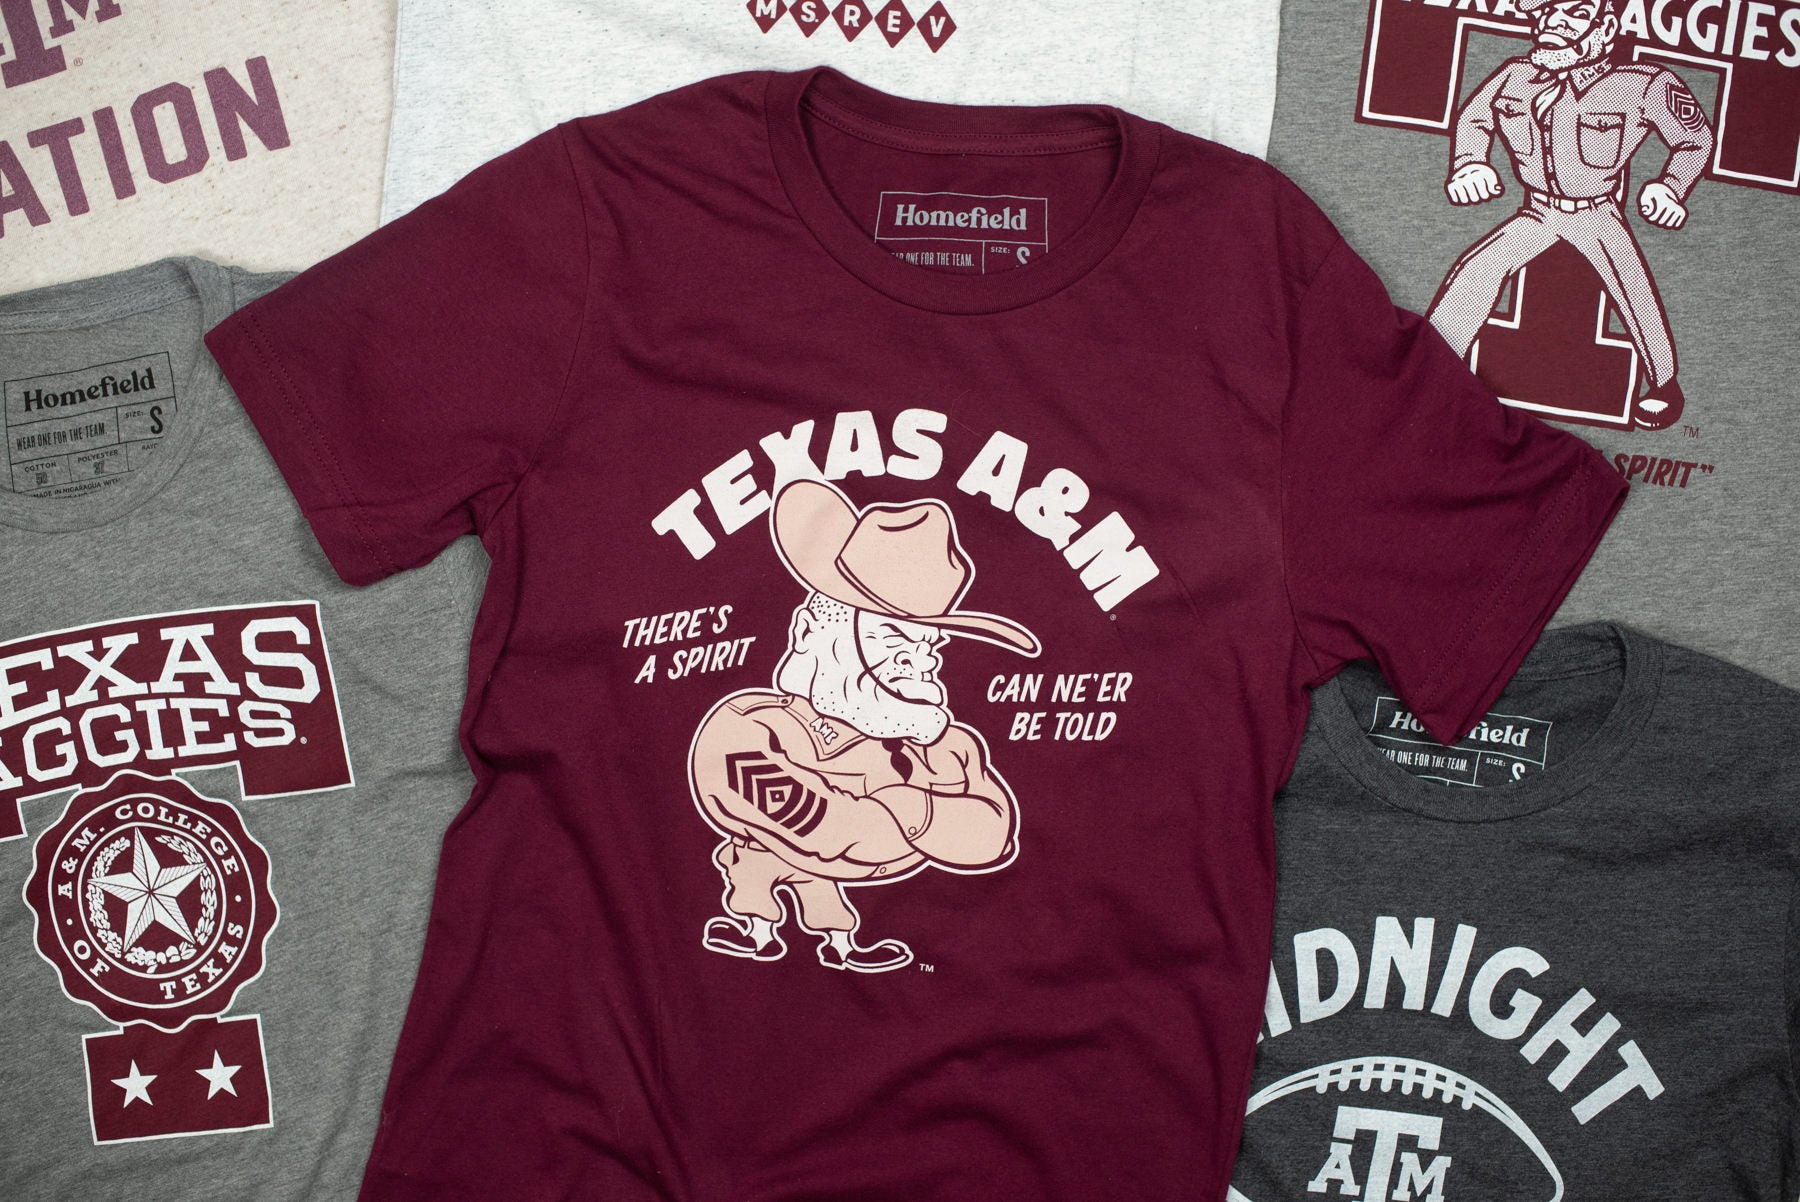 Vintage Texas A&M College Basketball Jersey – The Vintage Scene